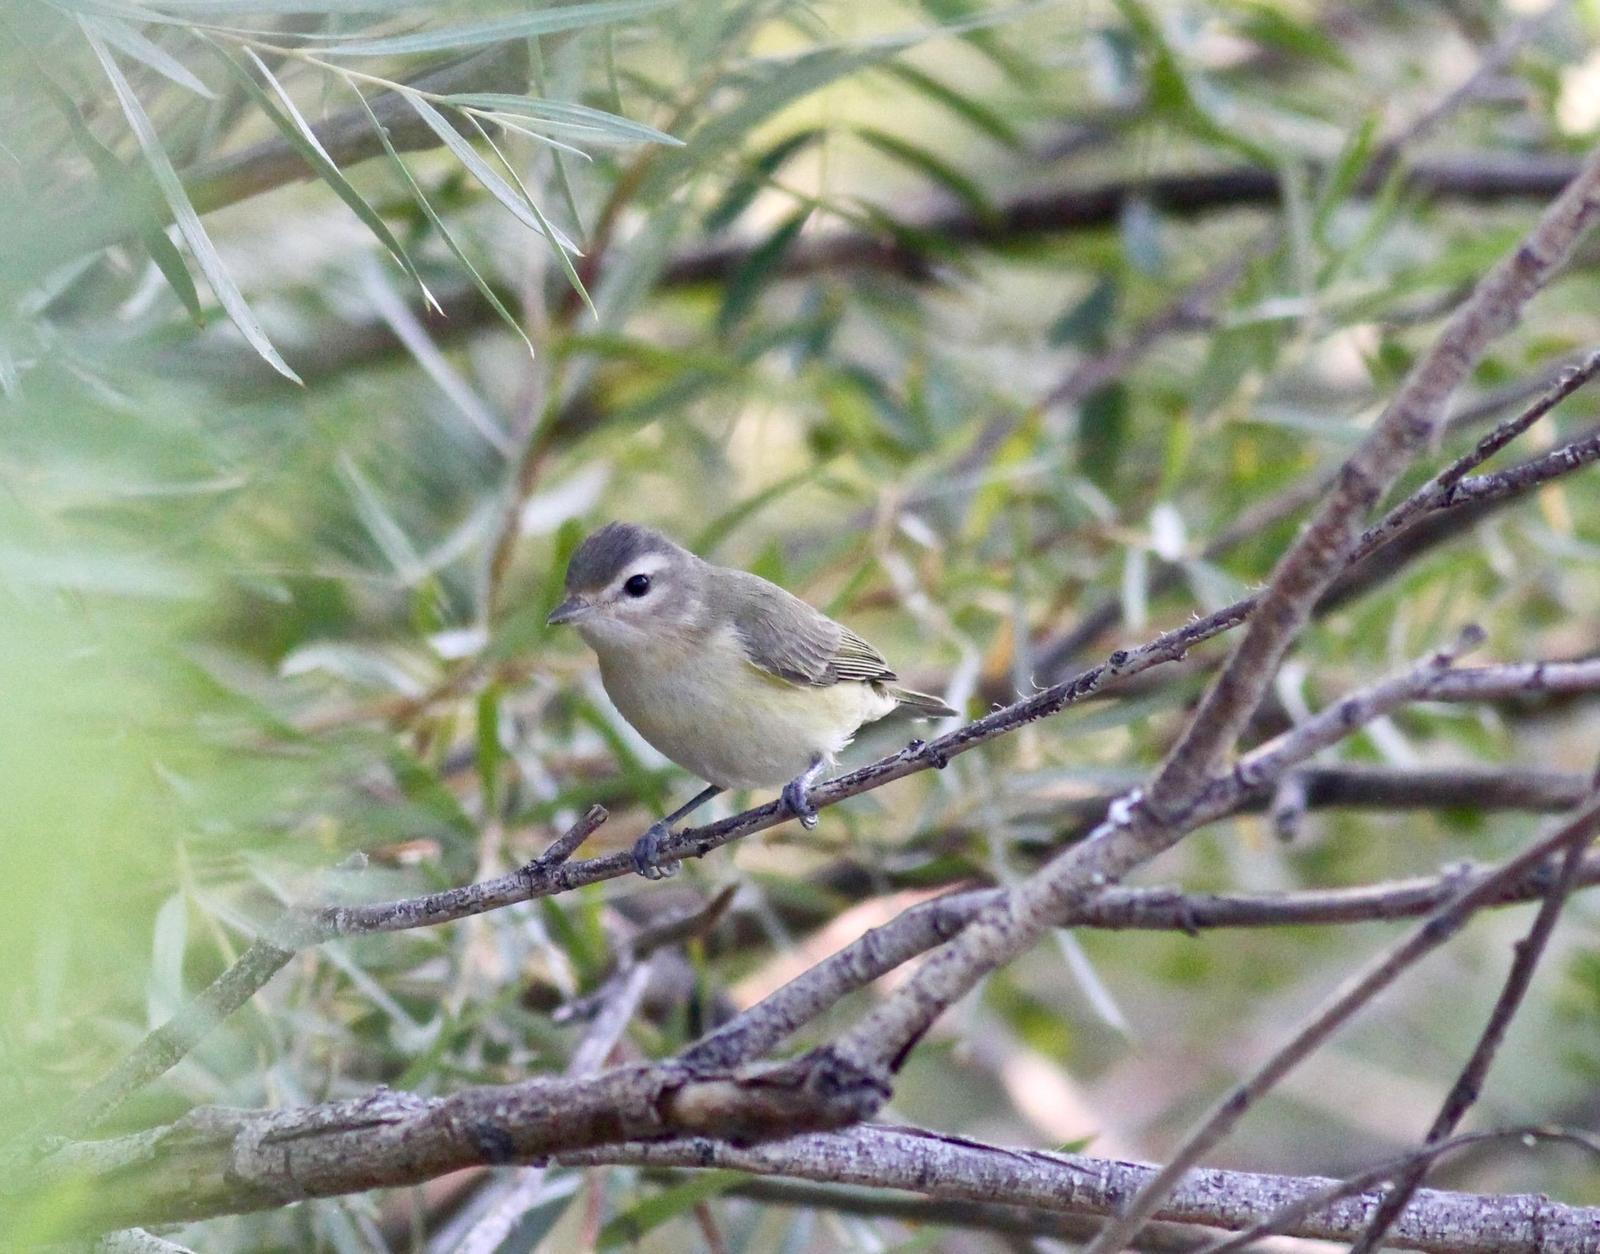 Warbling Vireo Photo by Kathryn Keith